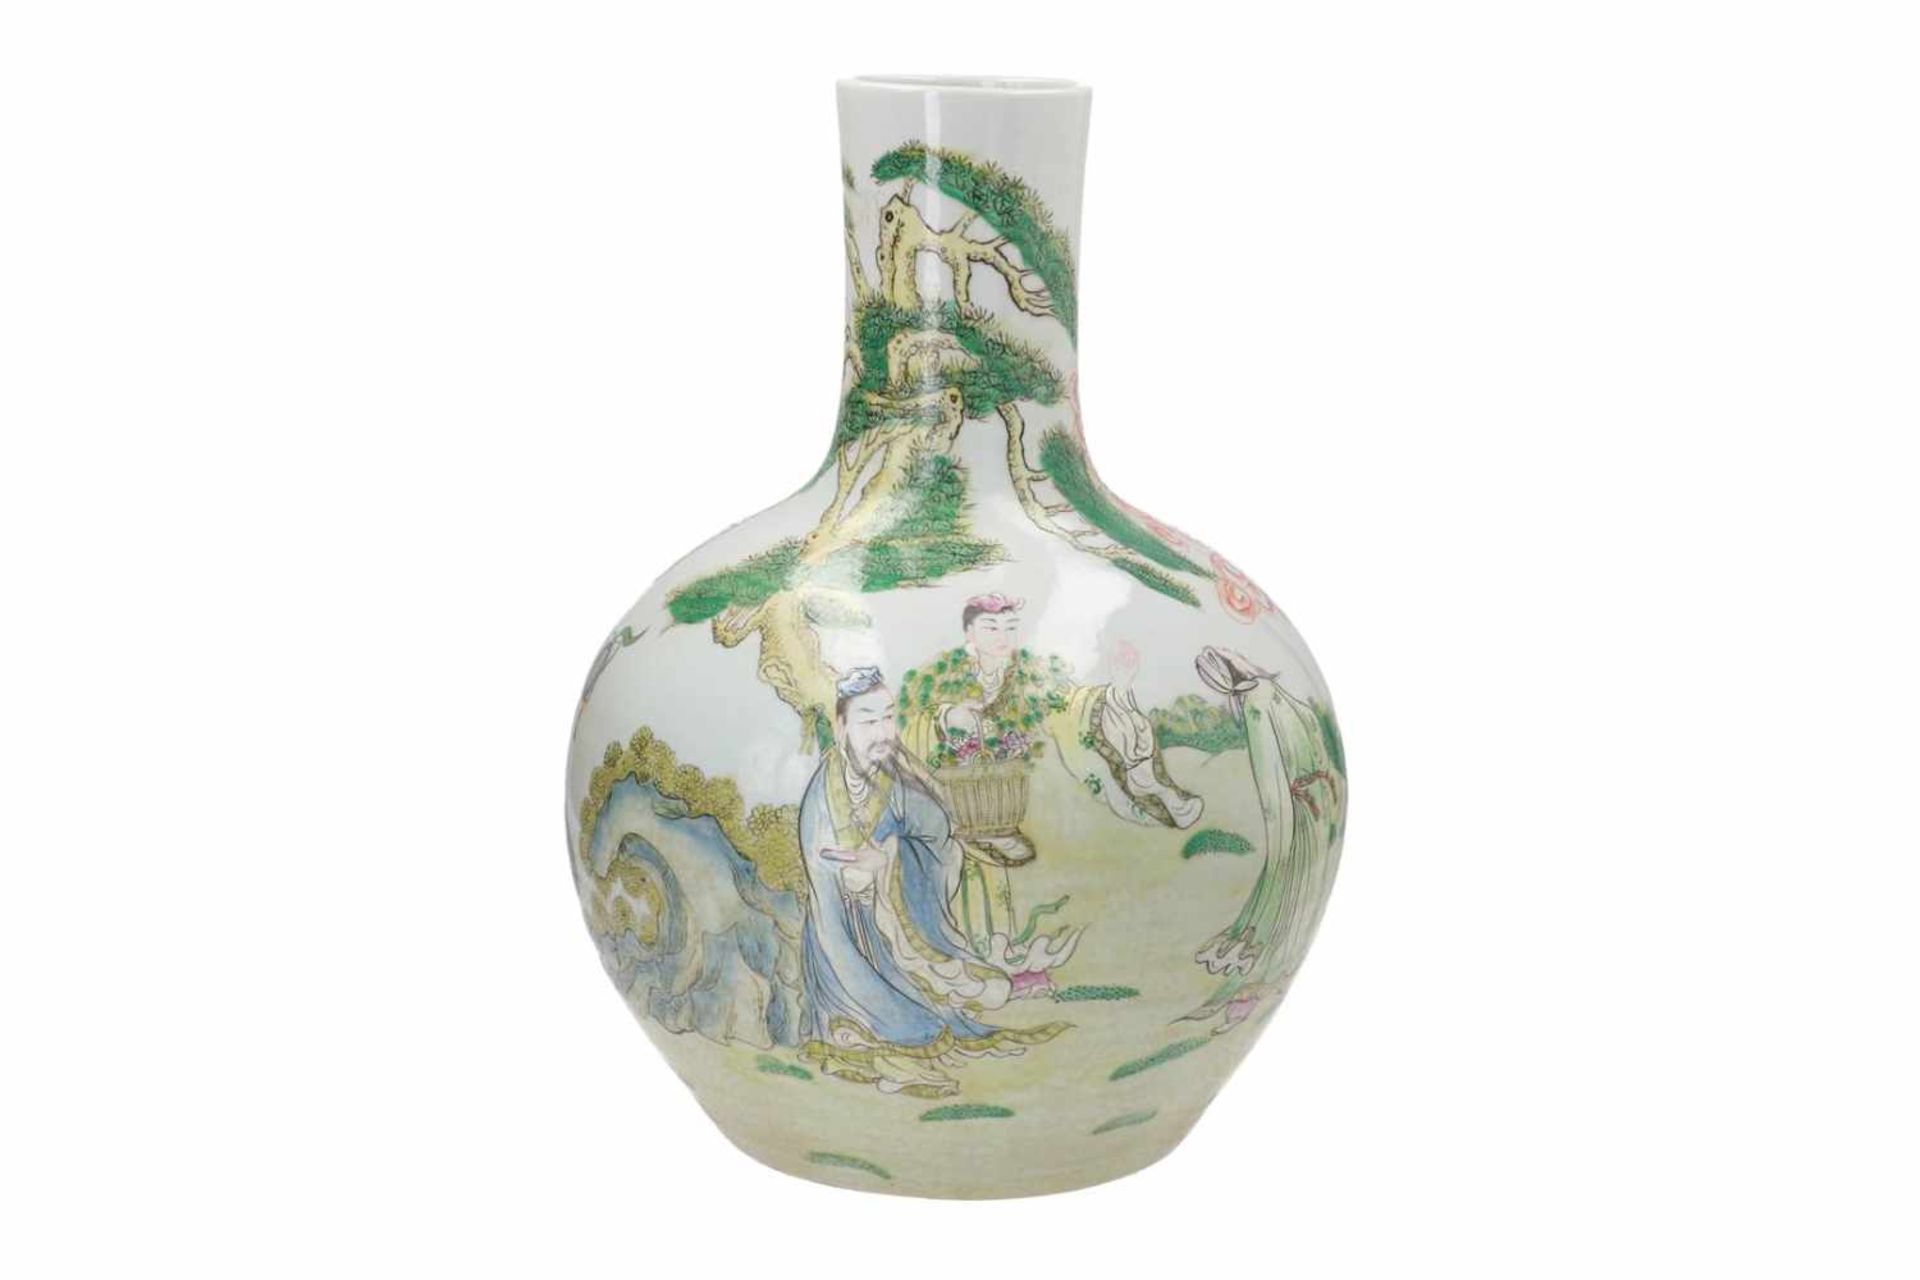 A polychrome porcelain vase, decorated with figures and musicians. Marked with seal mark Kangxi.